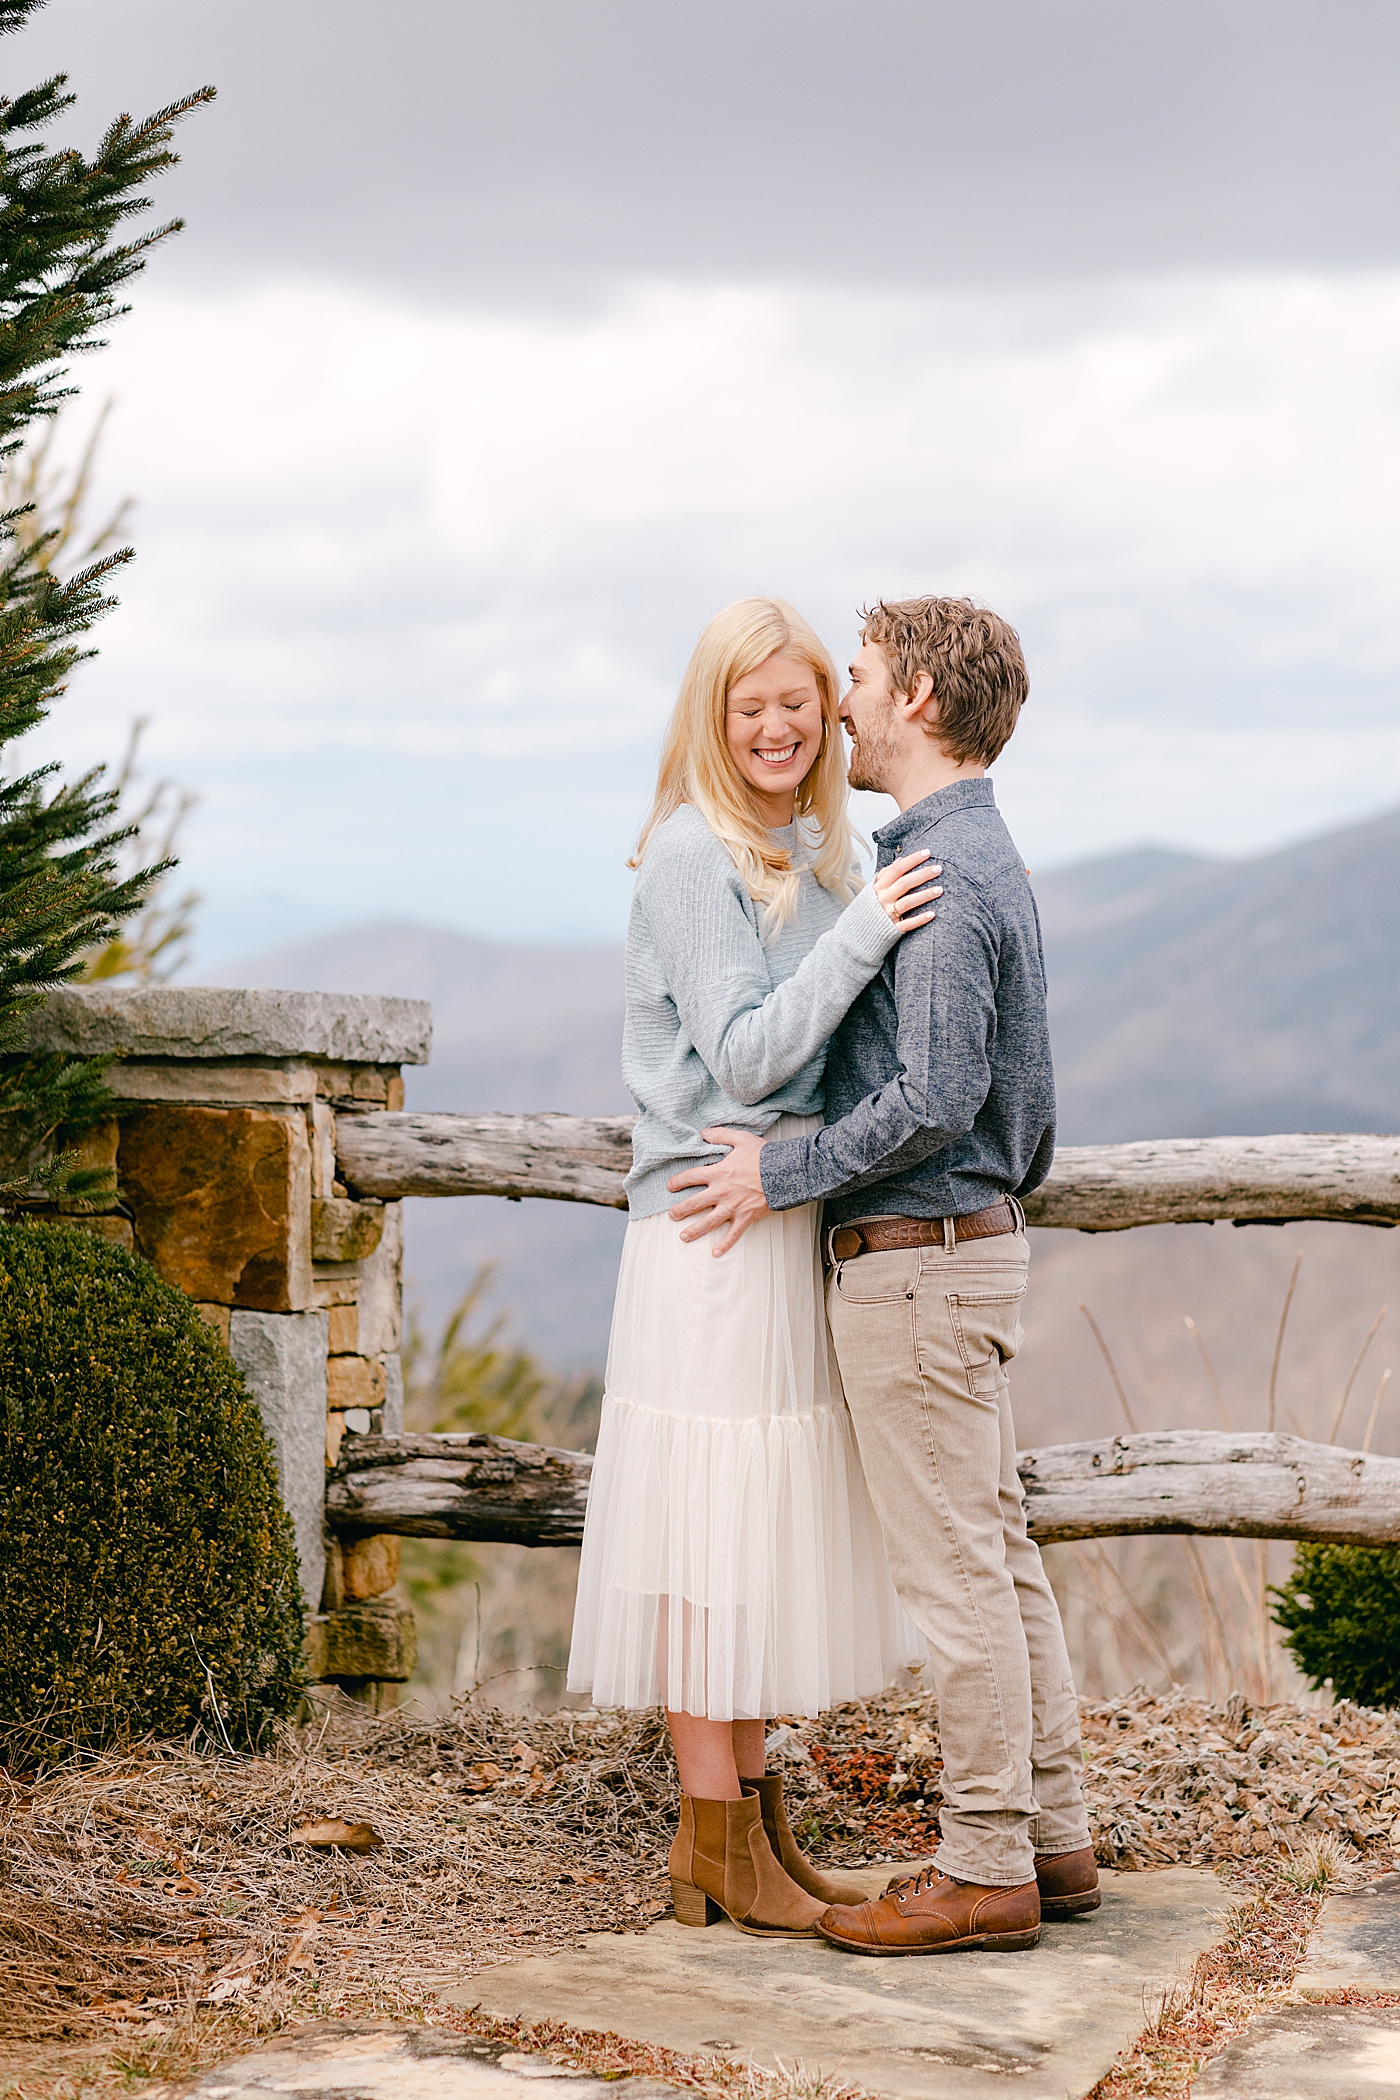 Couple laughing together | Image by Hope Helmuth Photography